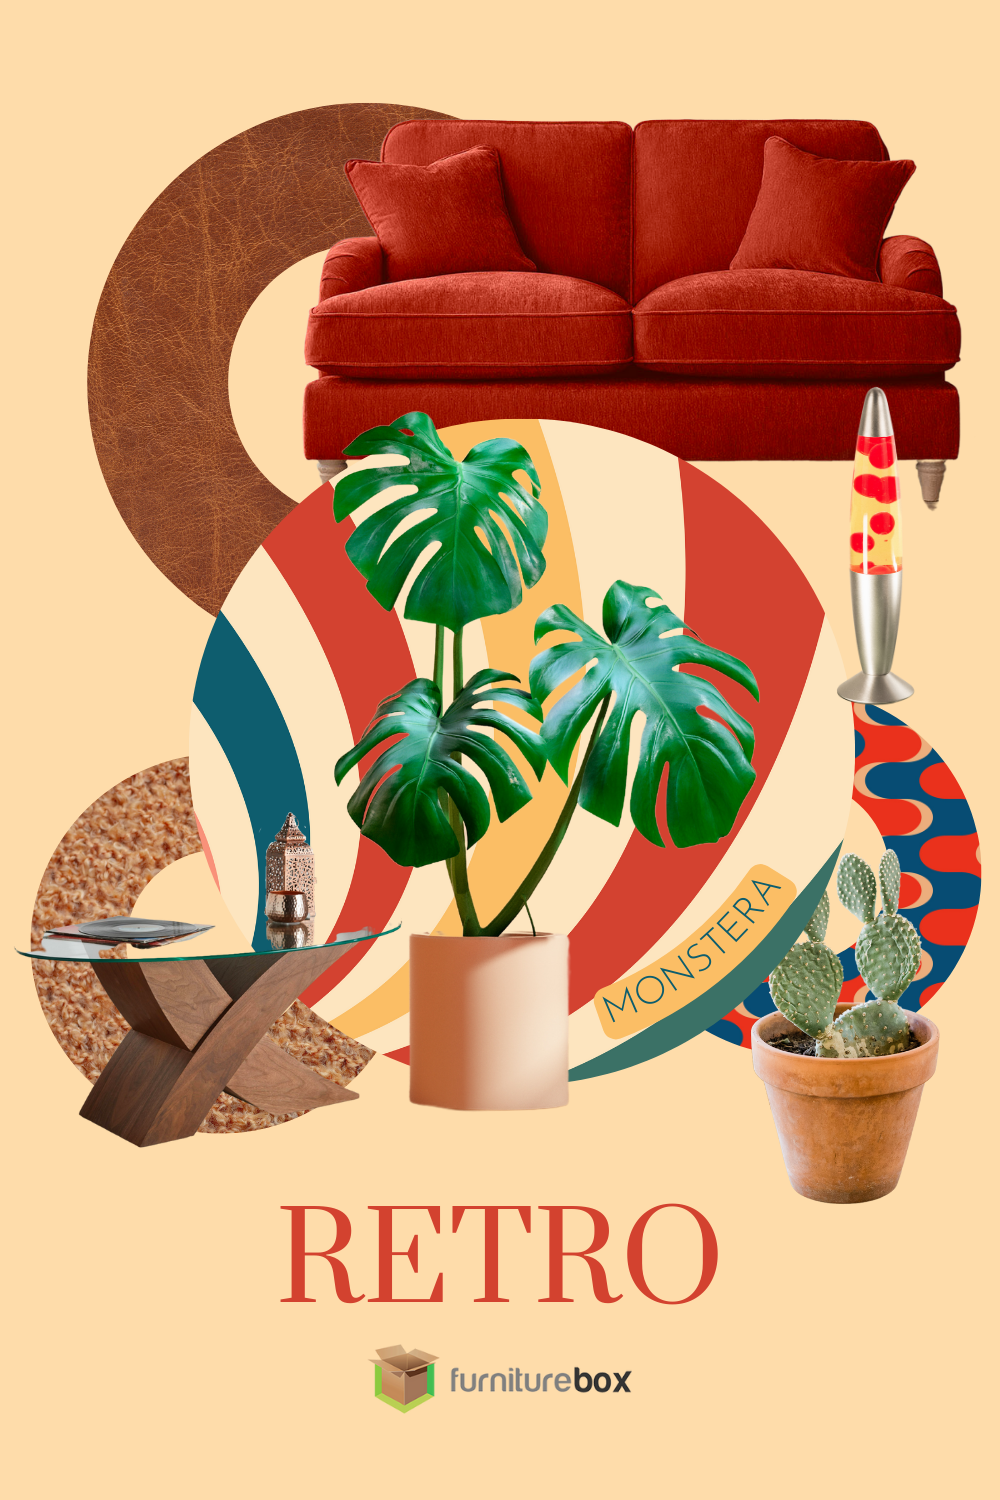 Houseplant interior design for Retro style using a monstera or Swiss cheese plant and retro colours, patterns and furniture pieces.